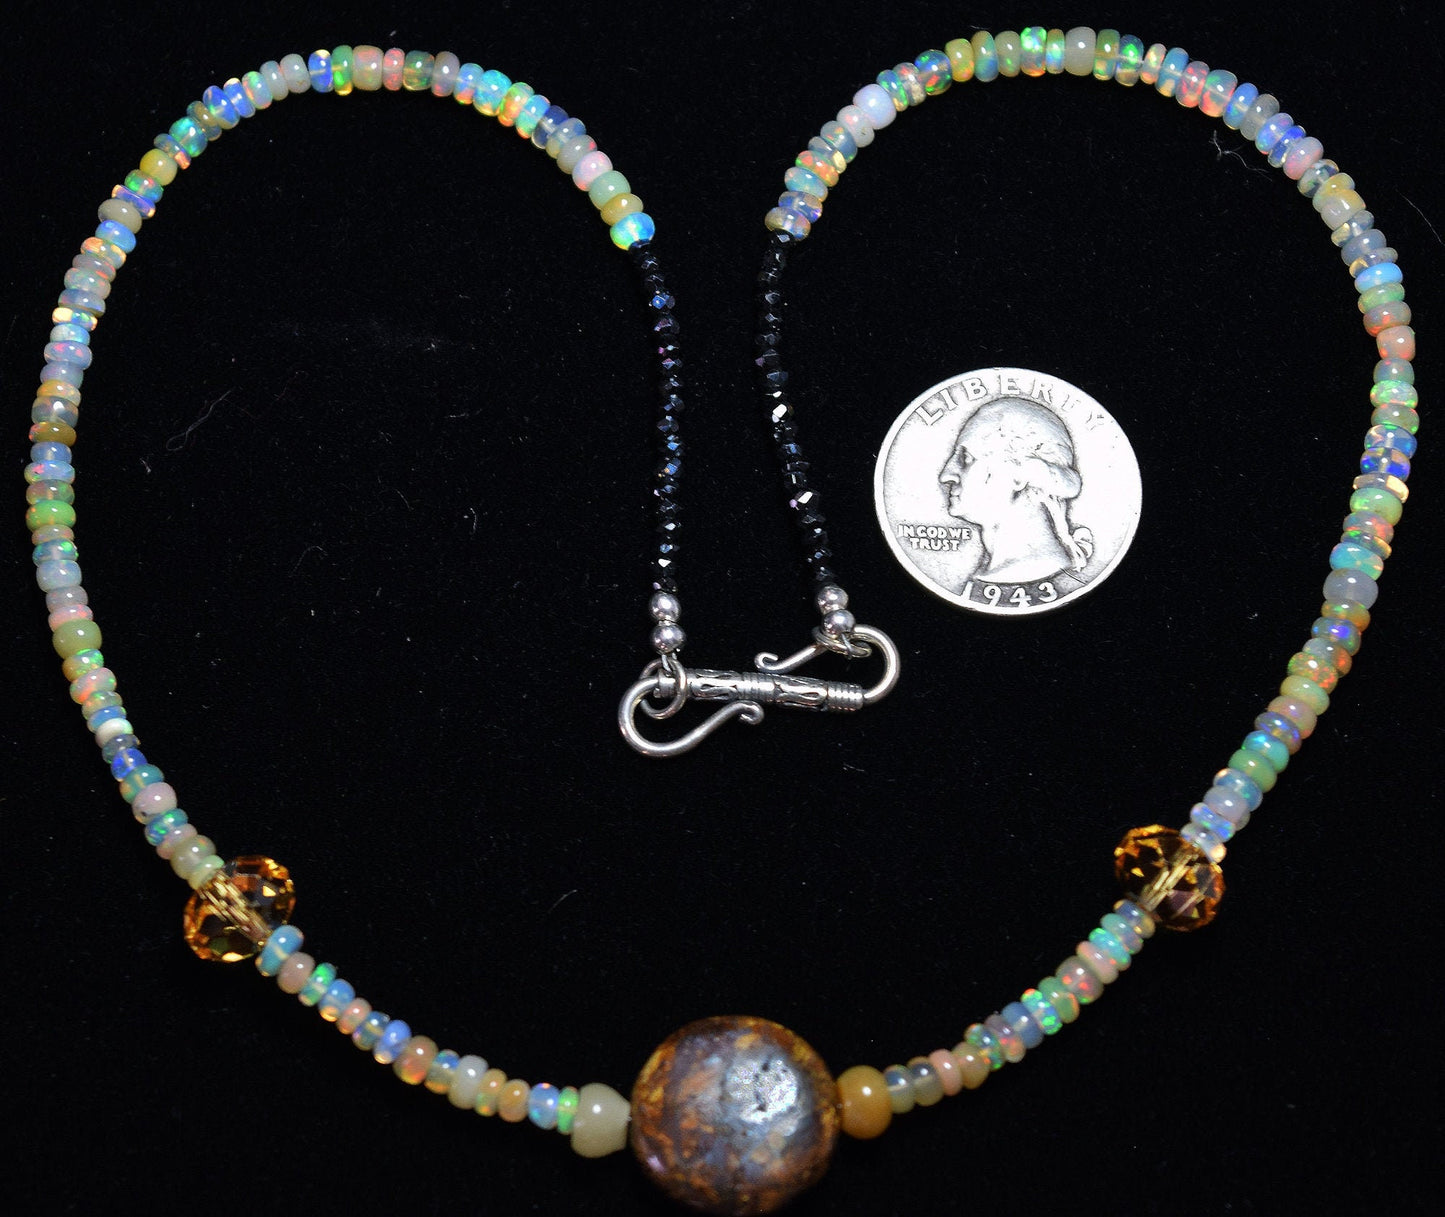 Vibrant and beautiful 18 inch Wello Opal necklace featuring a Bronzite center stone and sterling silver clasp.